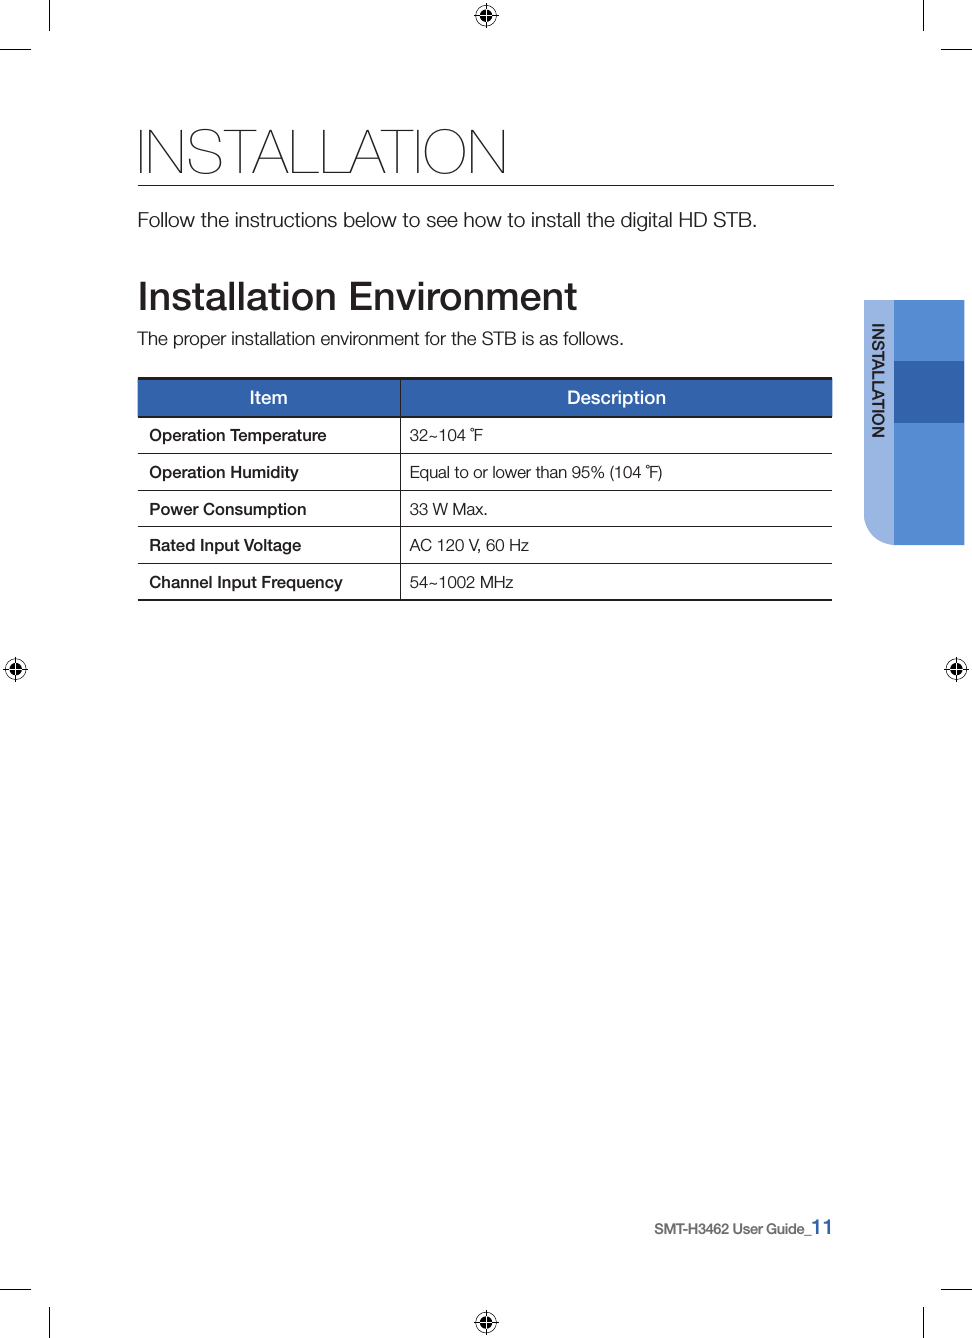 SMT-H3462 User Guide_11INSTALLATIONINSTALLATIONFollow the instructions below to see how to install the digital HD STB.Installation EnvironmentThe proper installation environment for the STB is as follows.Item DescriptionOperation Temperature 32~104 ˚FOperation Humidity Equal to or lower than 95% (104 ˚F)Power Consumption 33 W Max.Rated Input Voltage AC 120 V, 60 HzChannel Input Frequency 54~1002 MHz